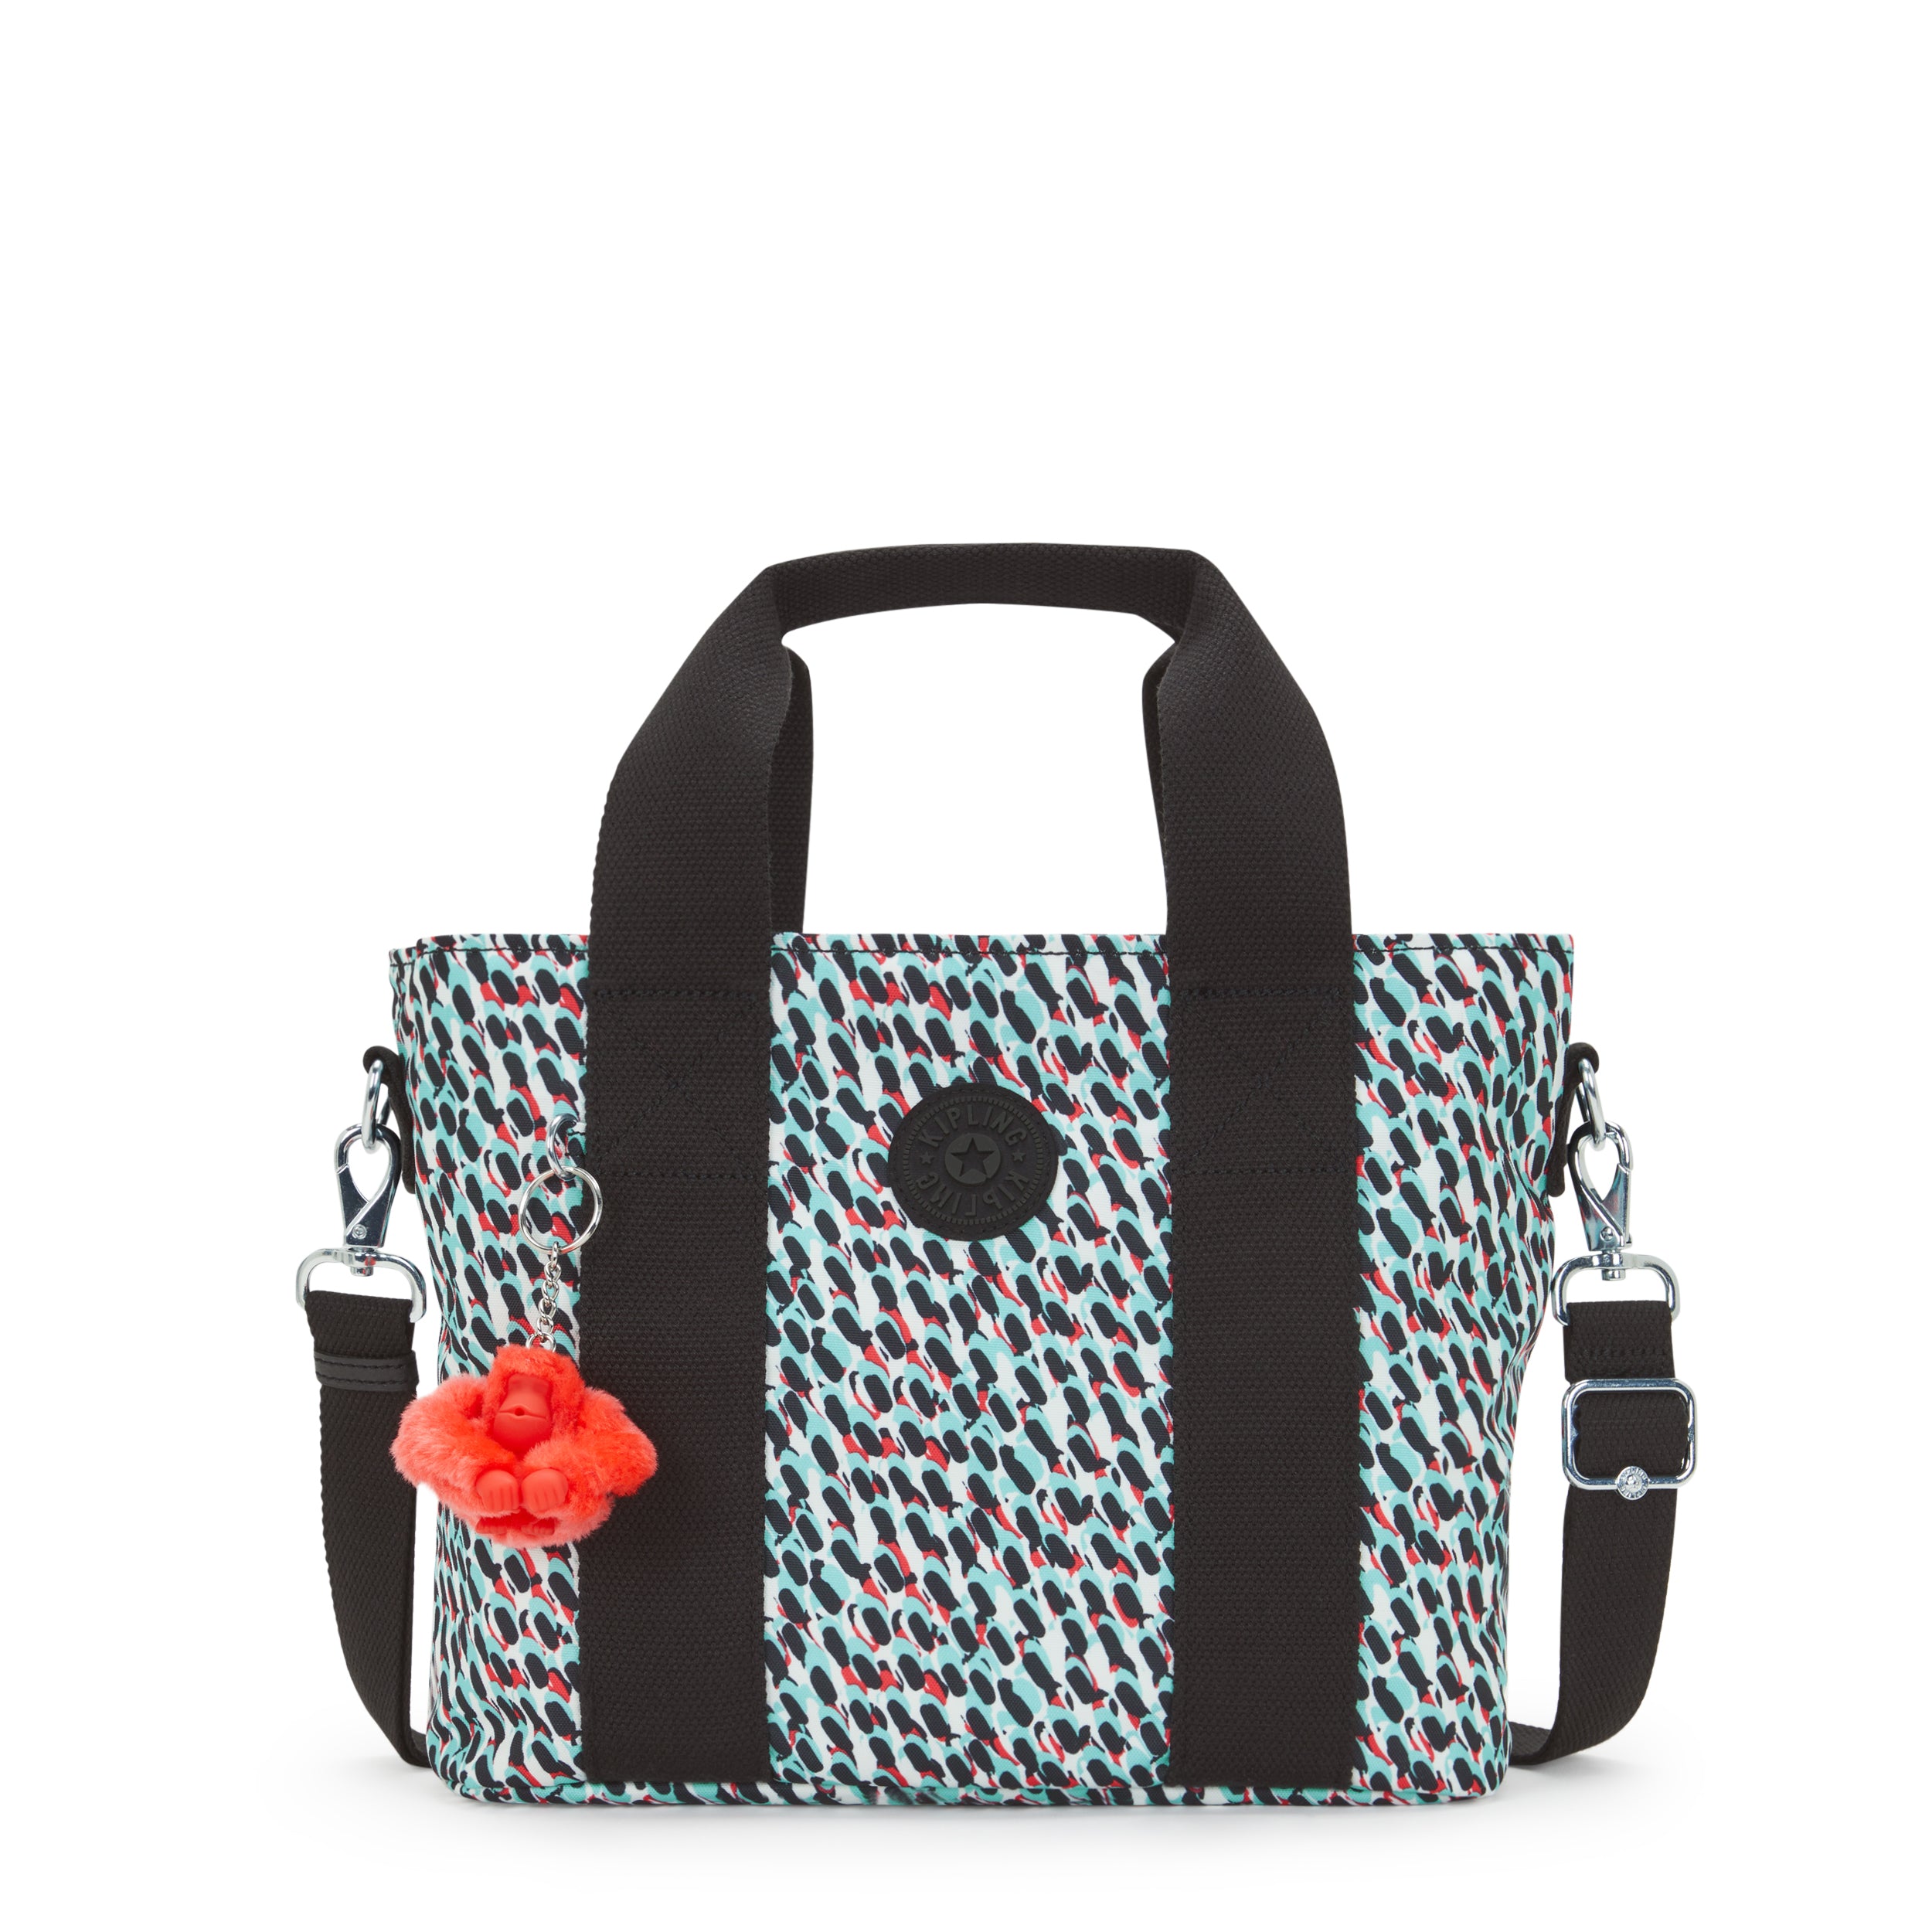 KIPLING-Minta M-Medium tote (with removable shoulderstrap)-Abstract Print-I7229-GN6